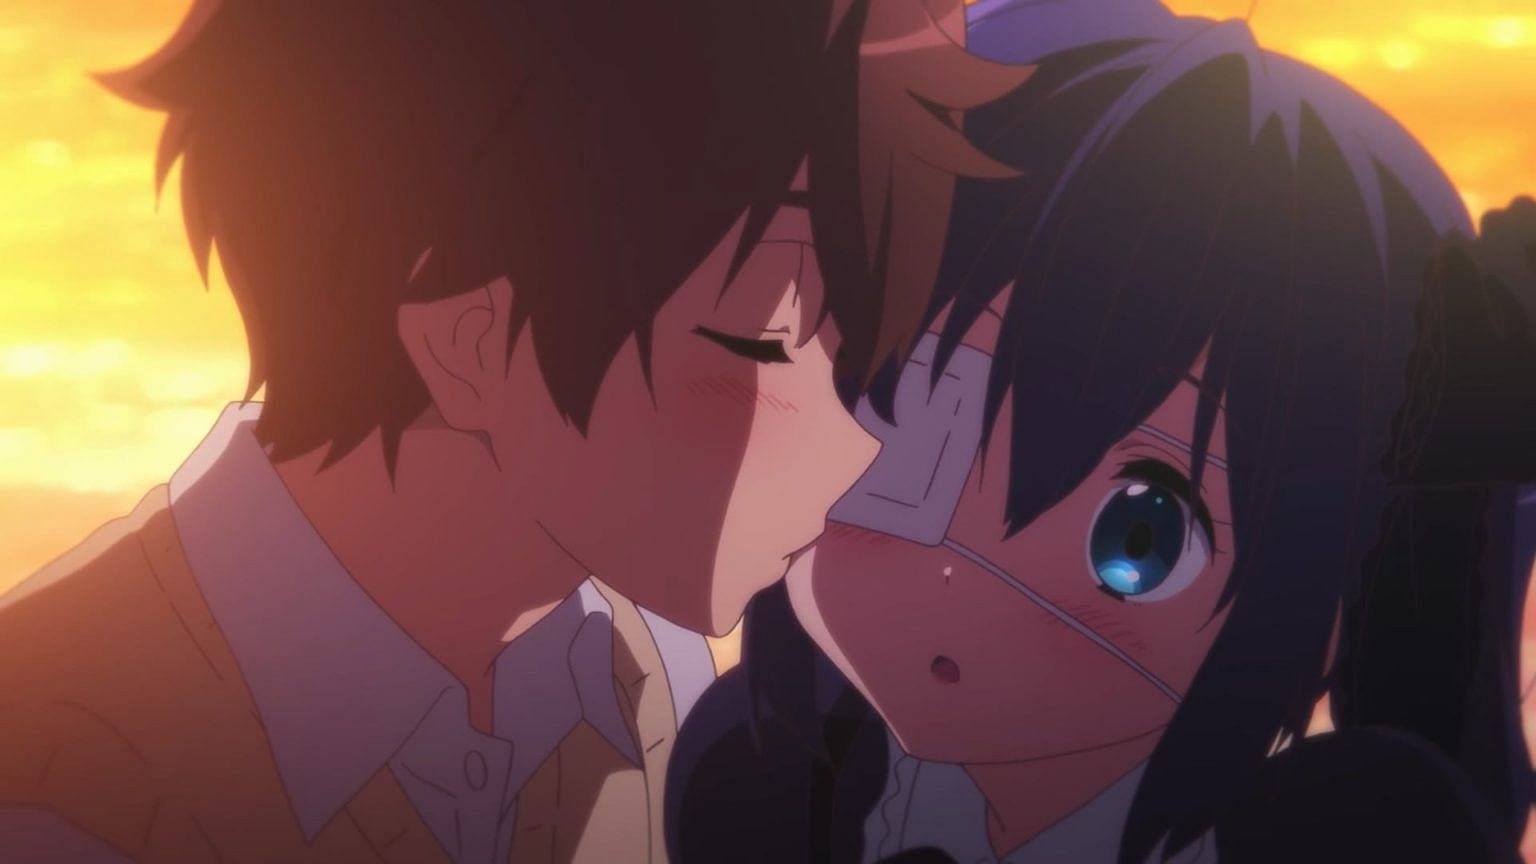 Yuuta and Rikka as seen in Love, Chunibyo &amp; Other Delusions (Image via Kyoto Animation)